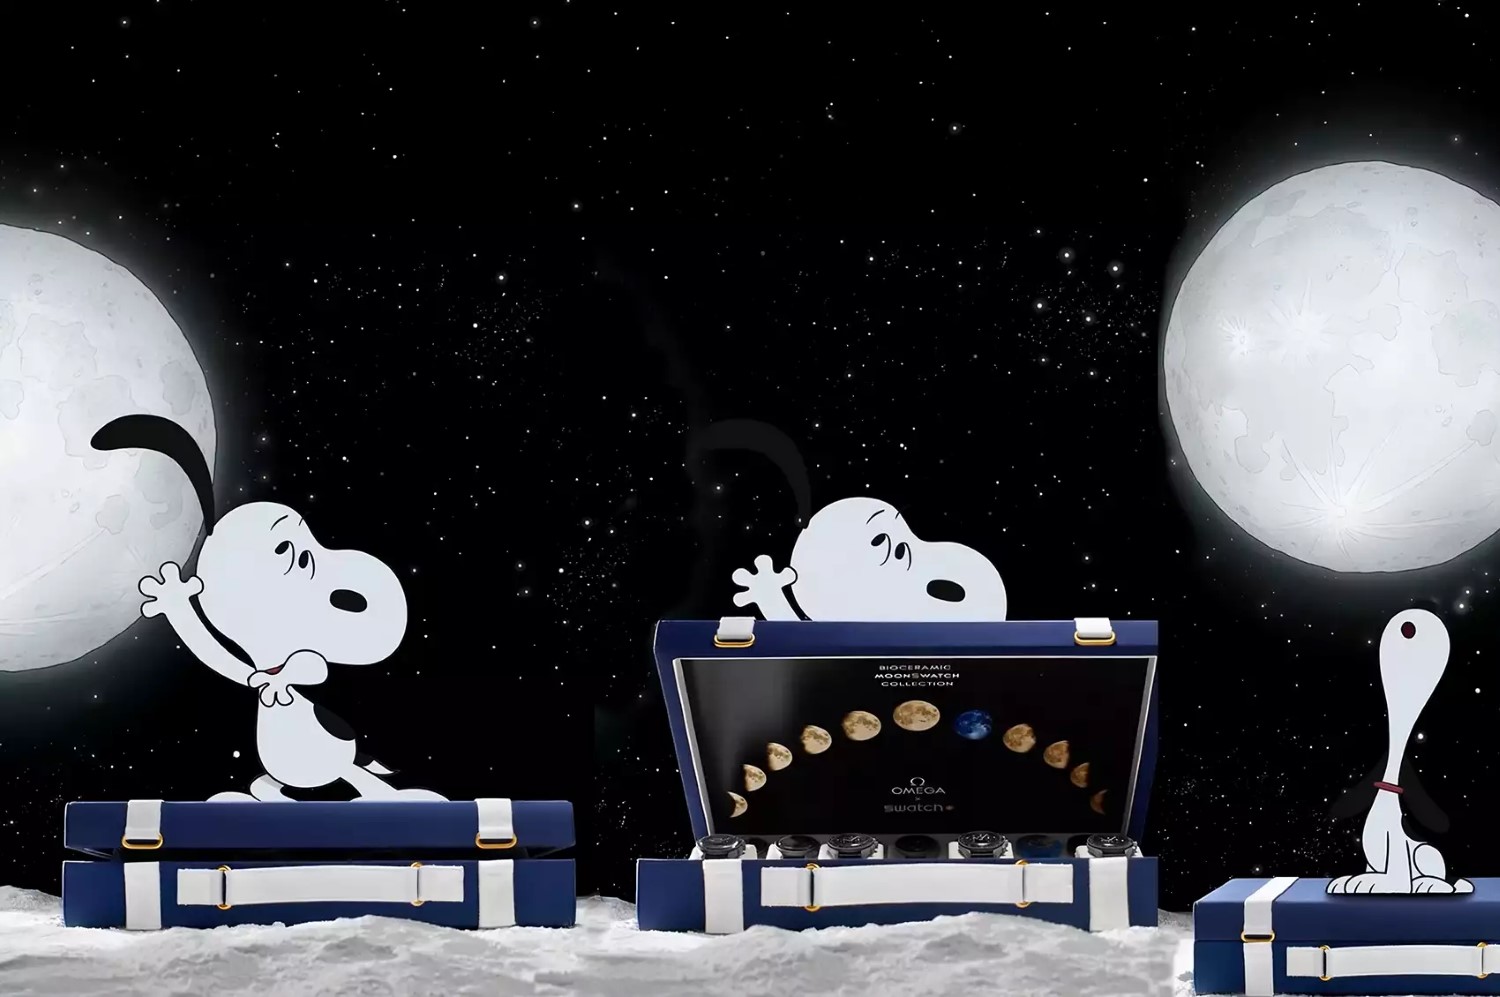 The Snoopy MoonSwatch - A match made in space (and pop culture)